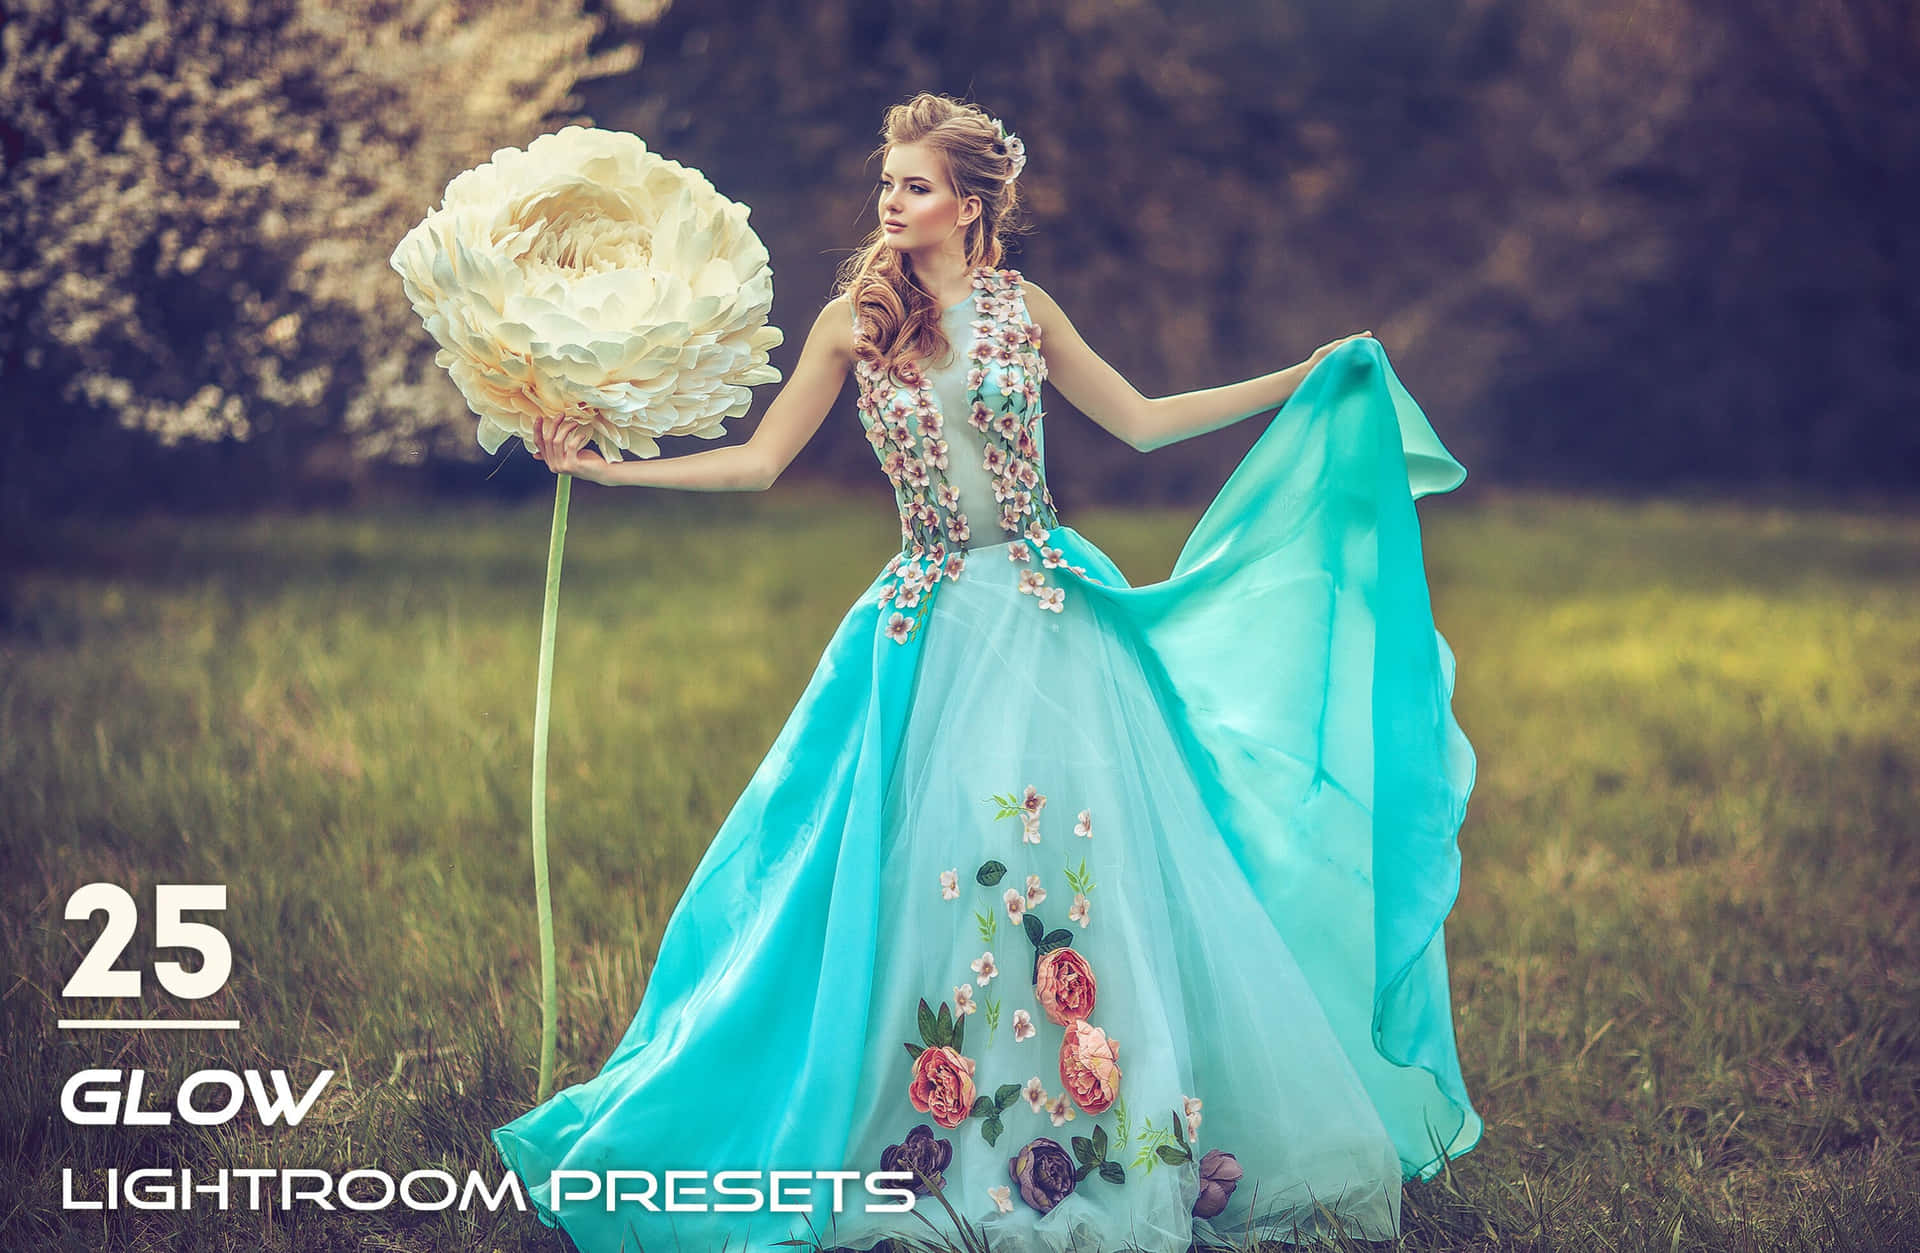 Unlock More Creative Freedom with Lightroom Presets